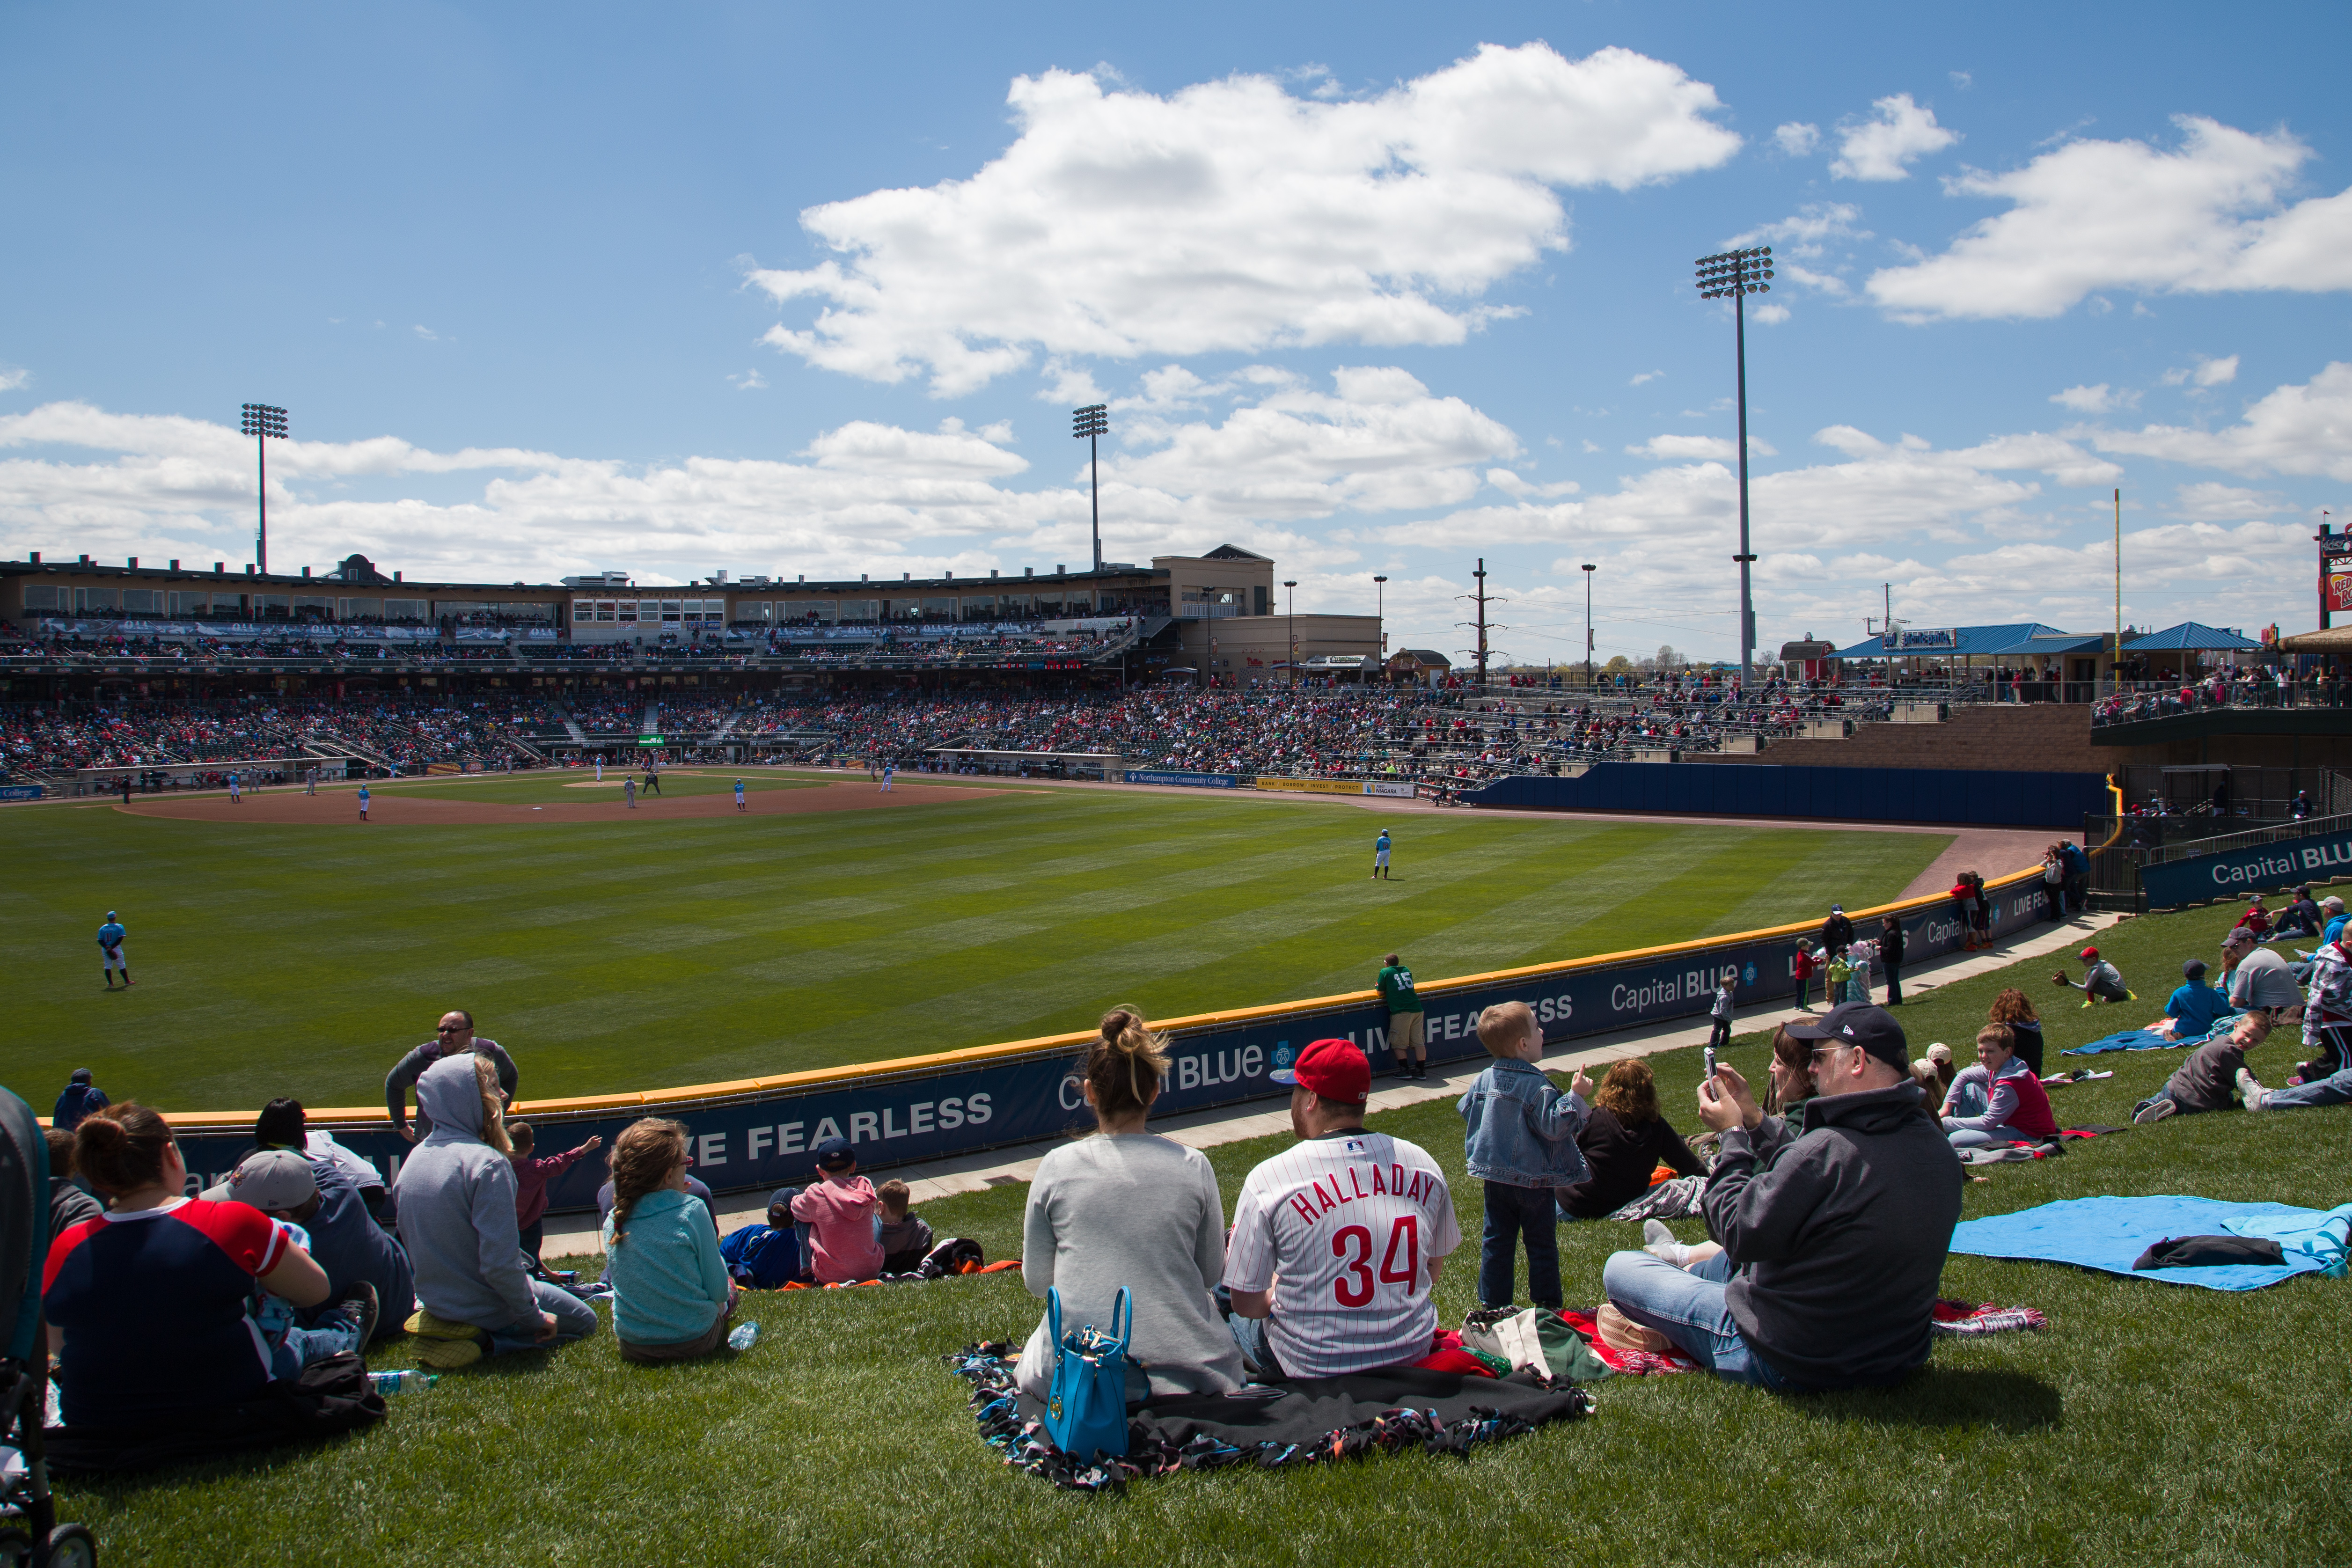 Visit Coca-Cola Park, home of the Lehigh Valley IronPigs